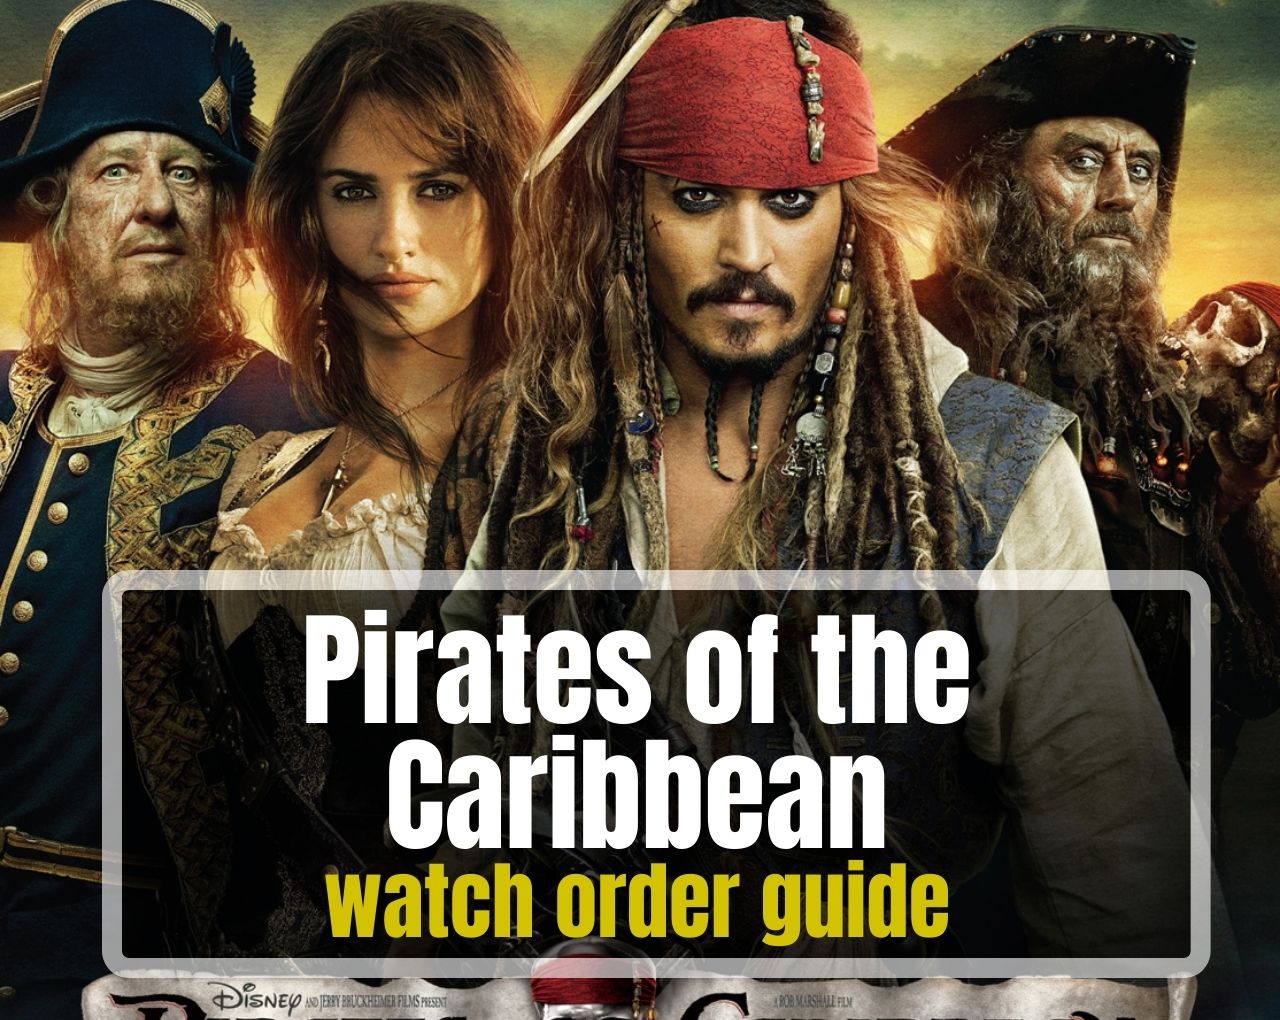 Pirates of the Caribbean watch order guide